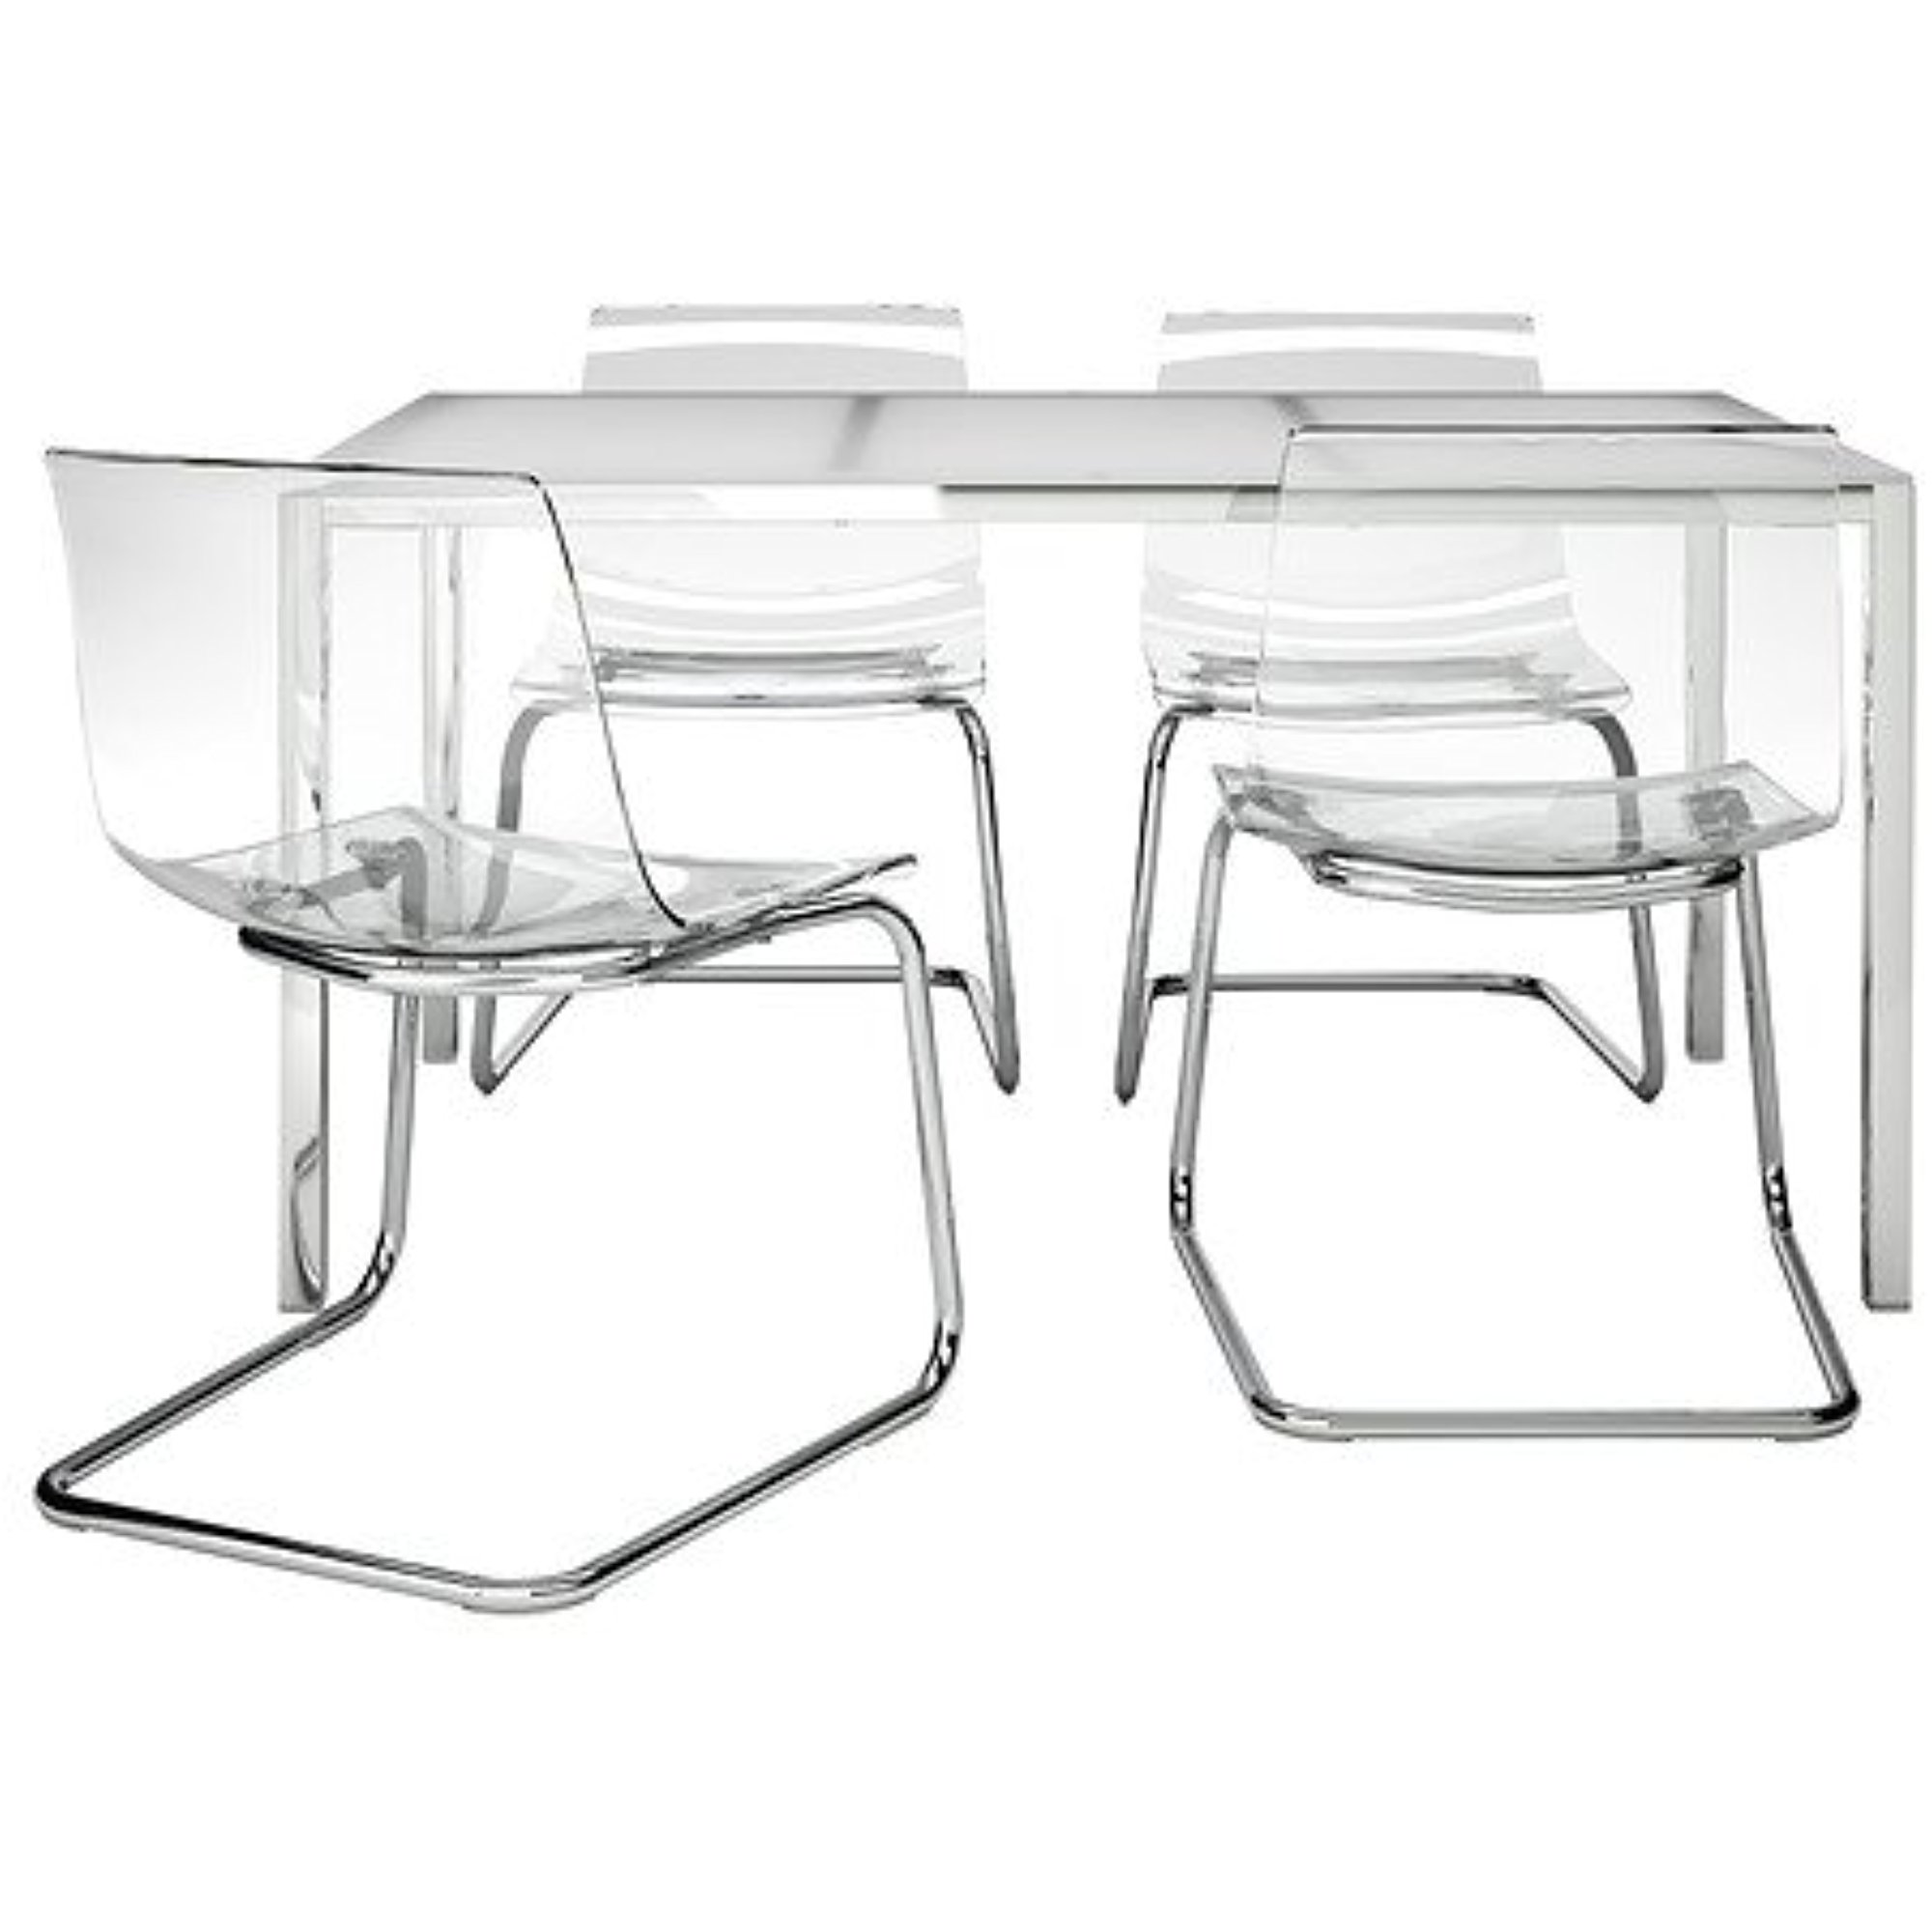 Ikea Table and chairs, glass white, clear 42020.1185.1834